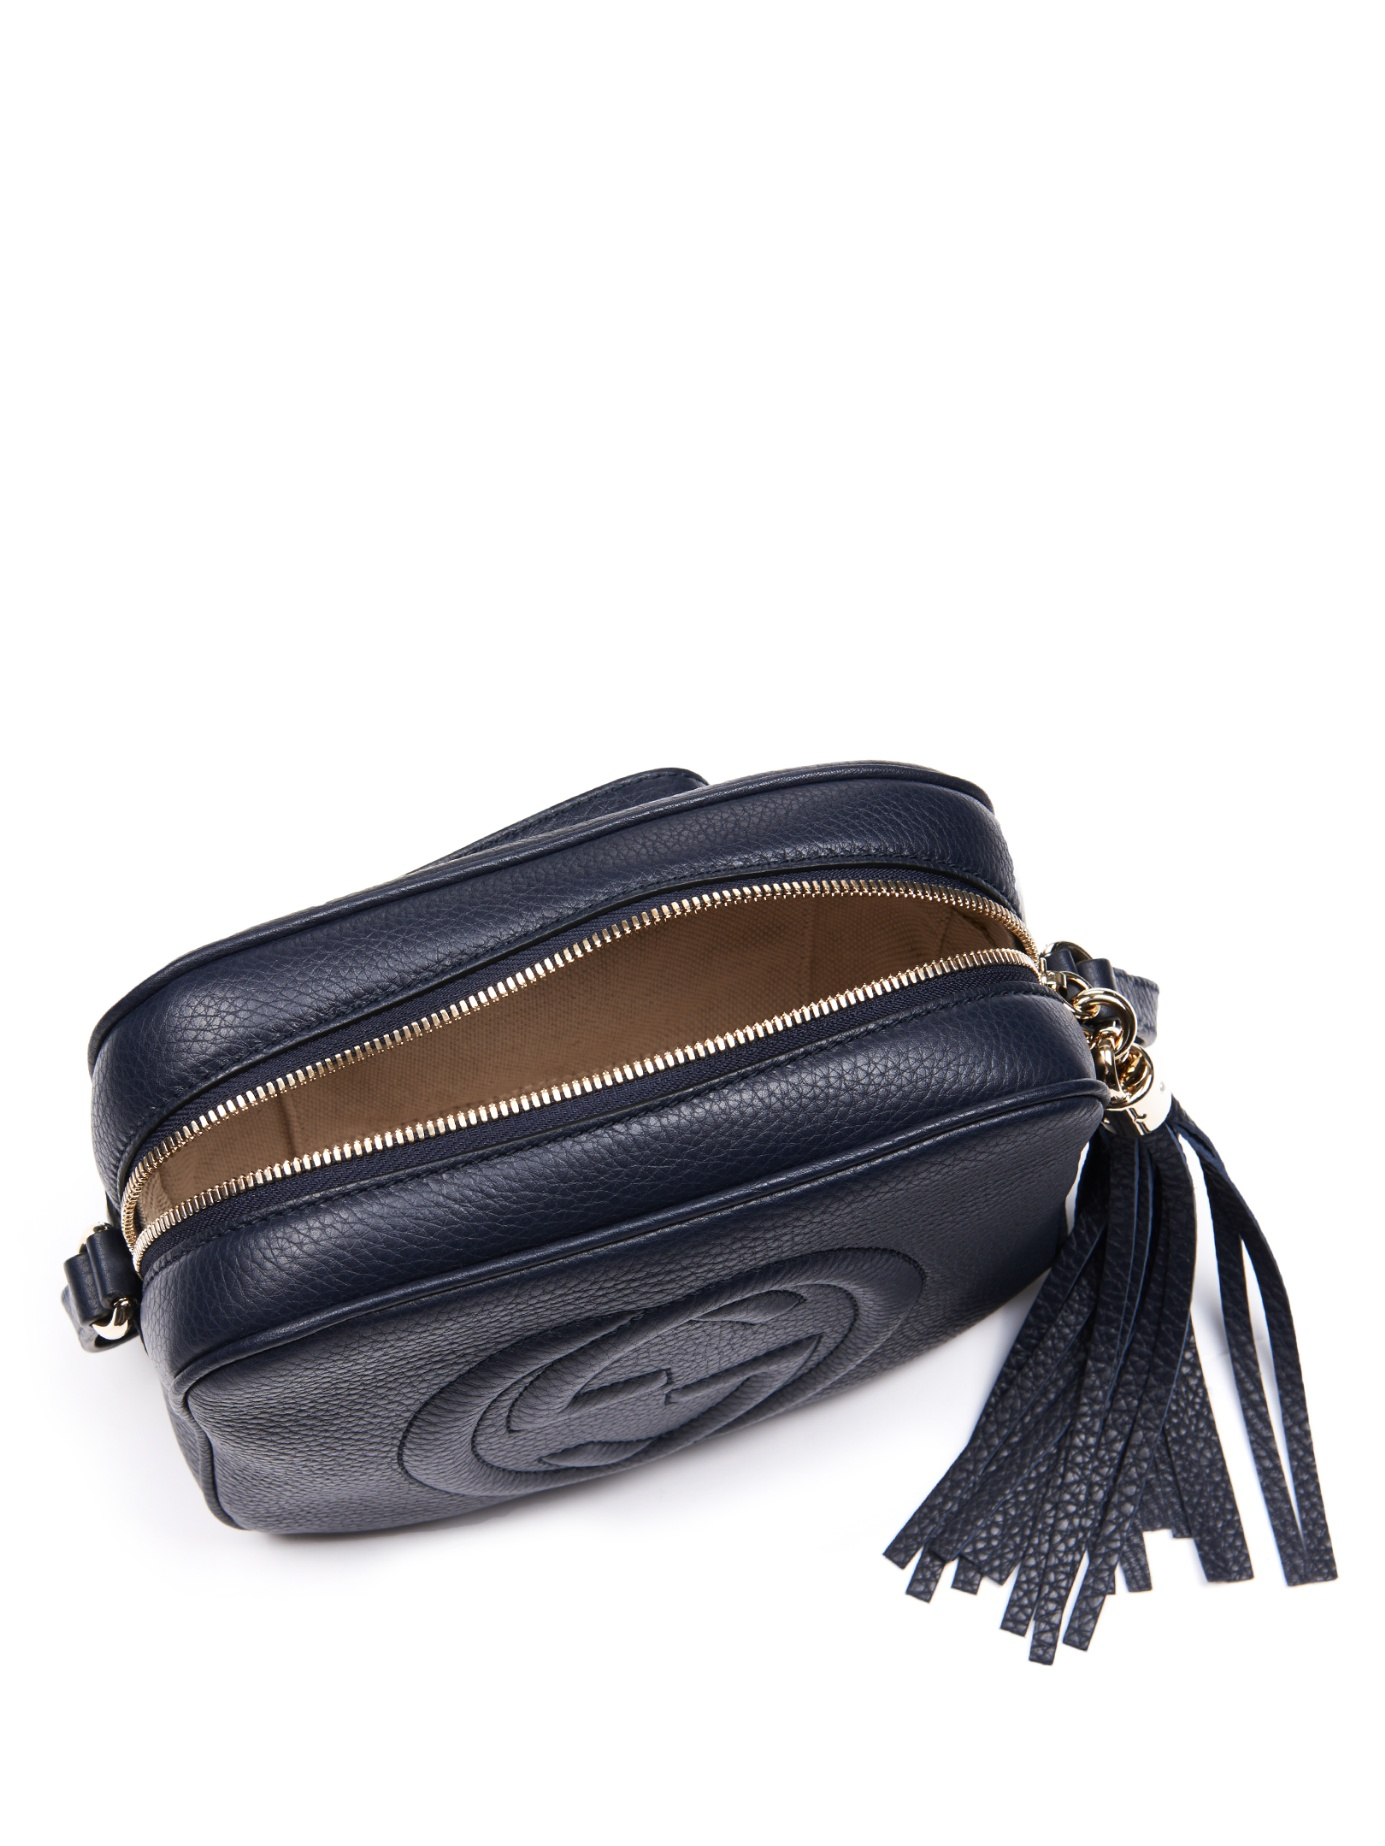 Gucci Soho Leather Cross-body Bag in Navy (Black) - Lyst